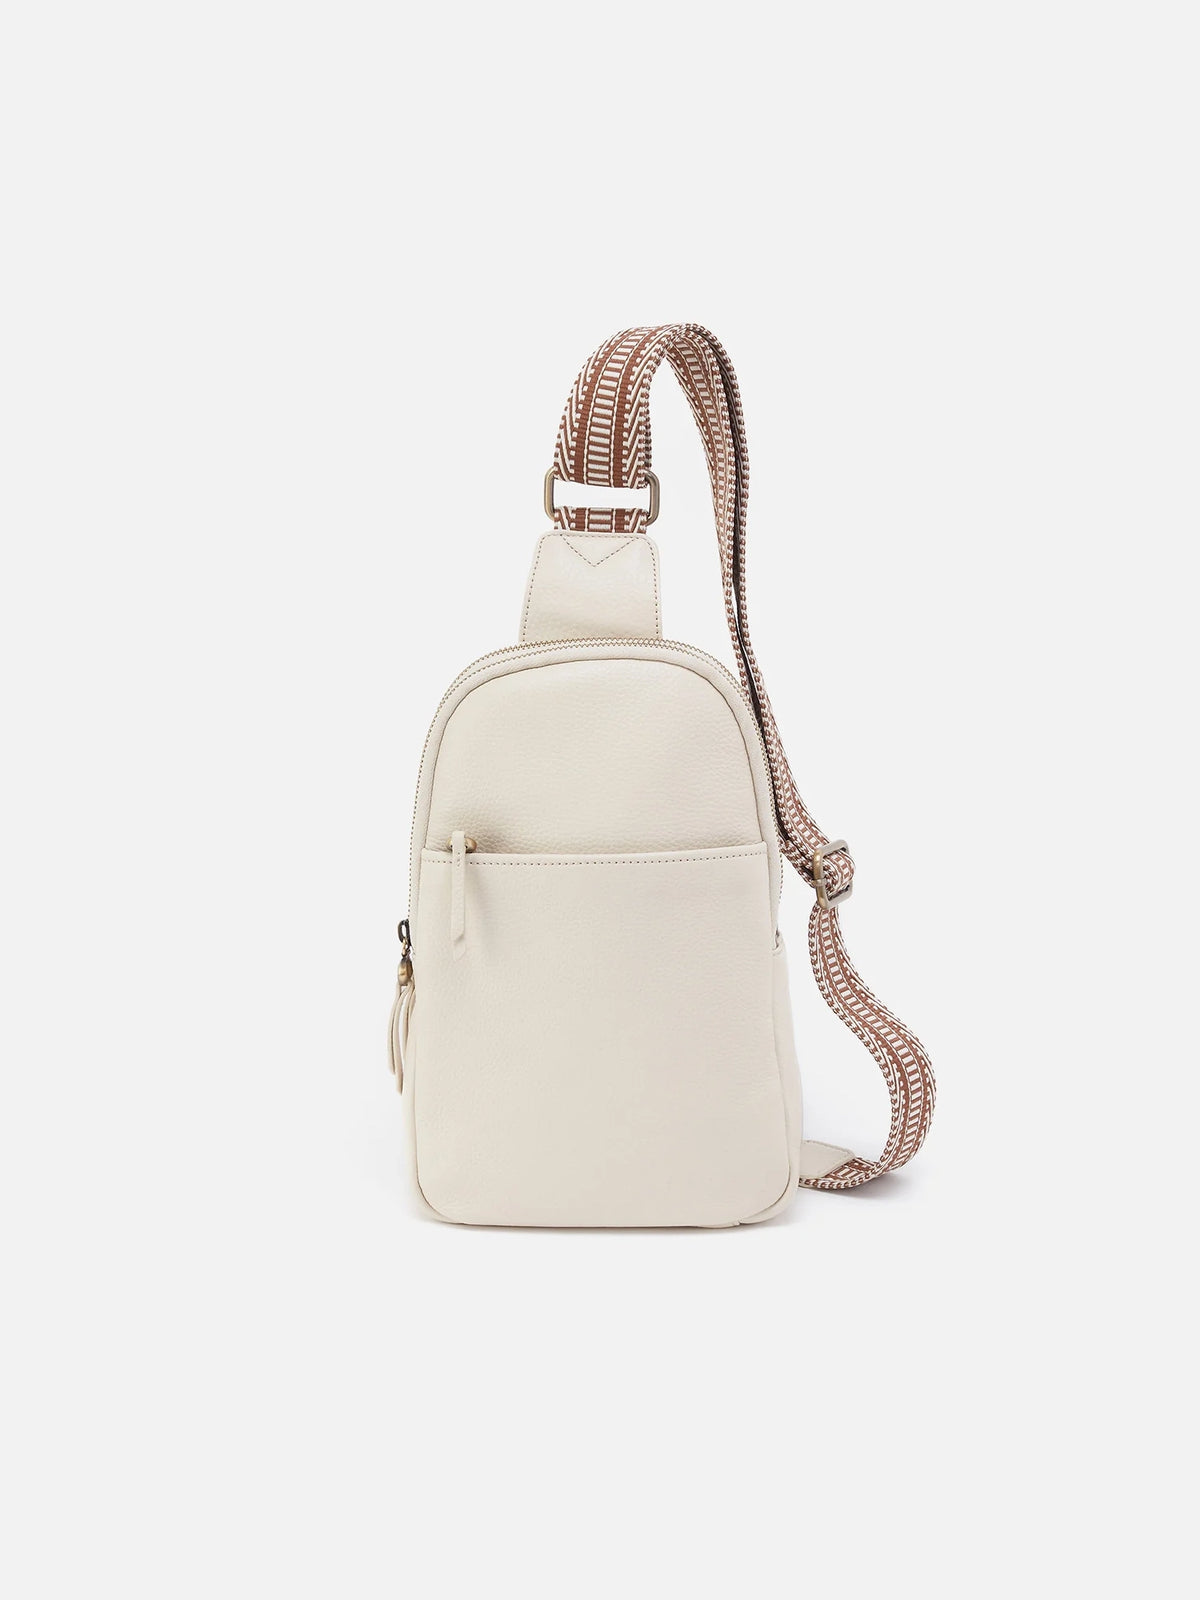 hobo cass sling bag in ivory pebbled leather